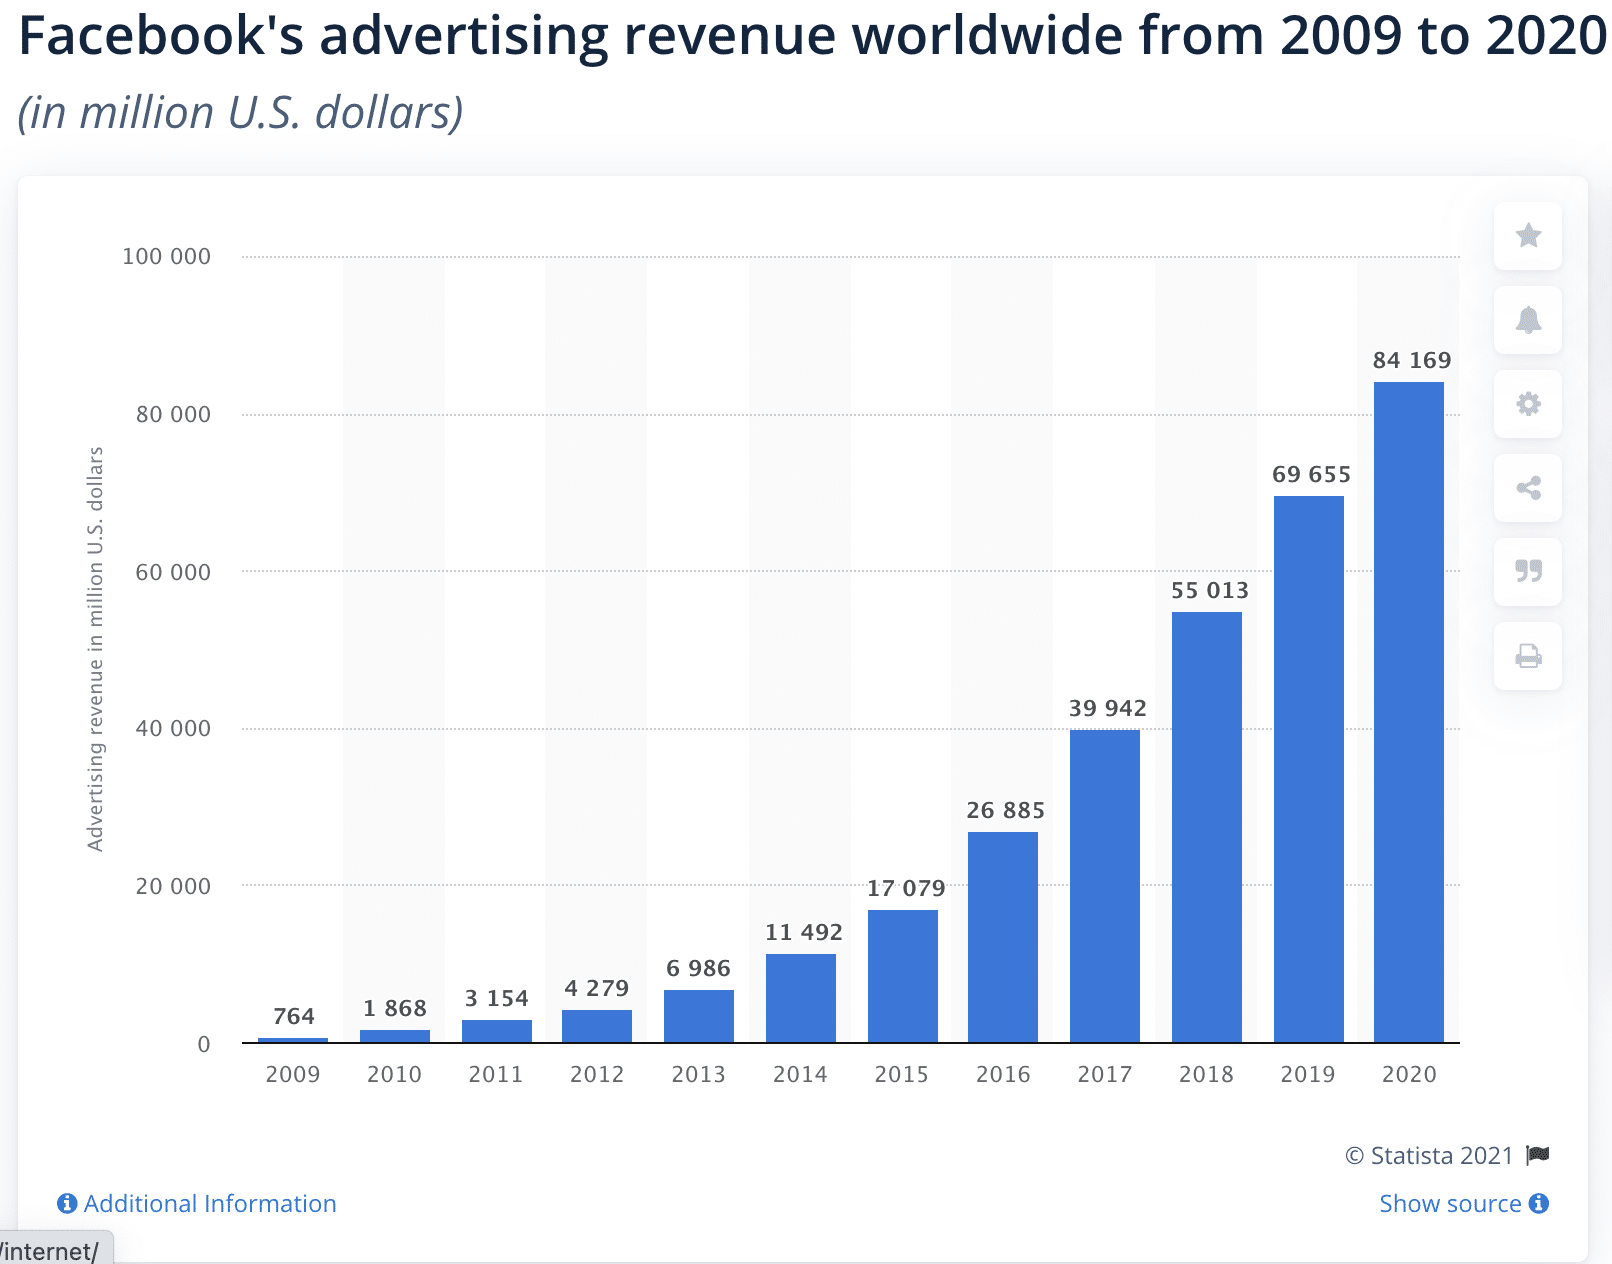 Facebook's advertising revenue from 2009 to 2020